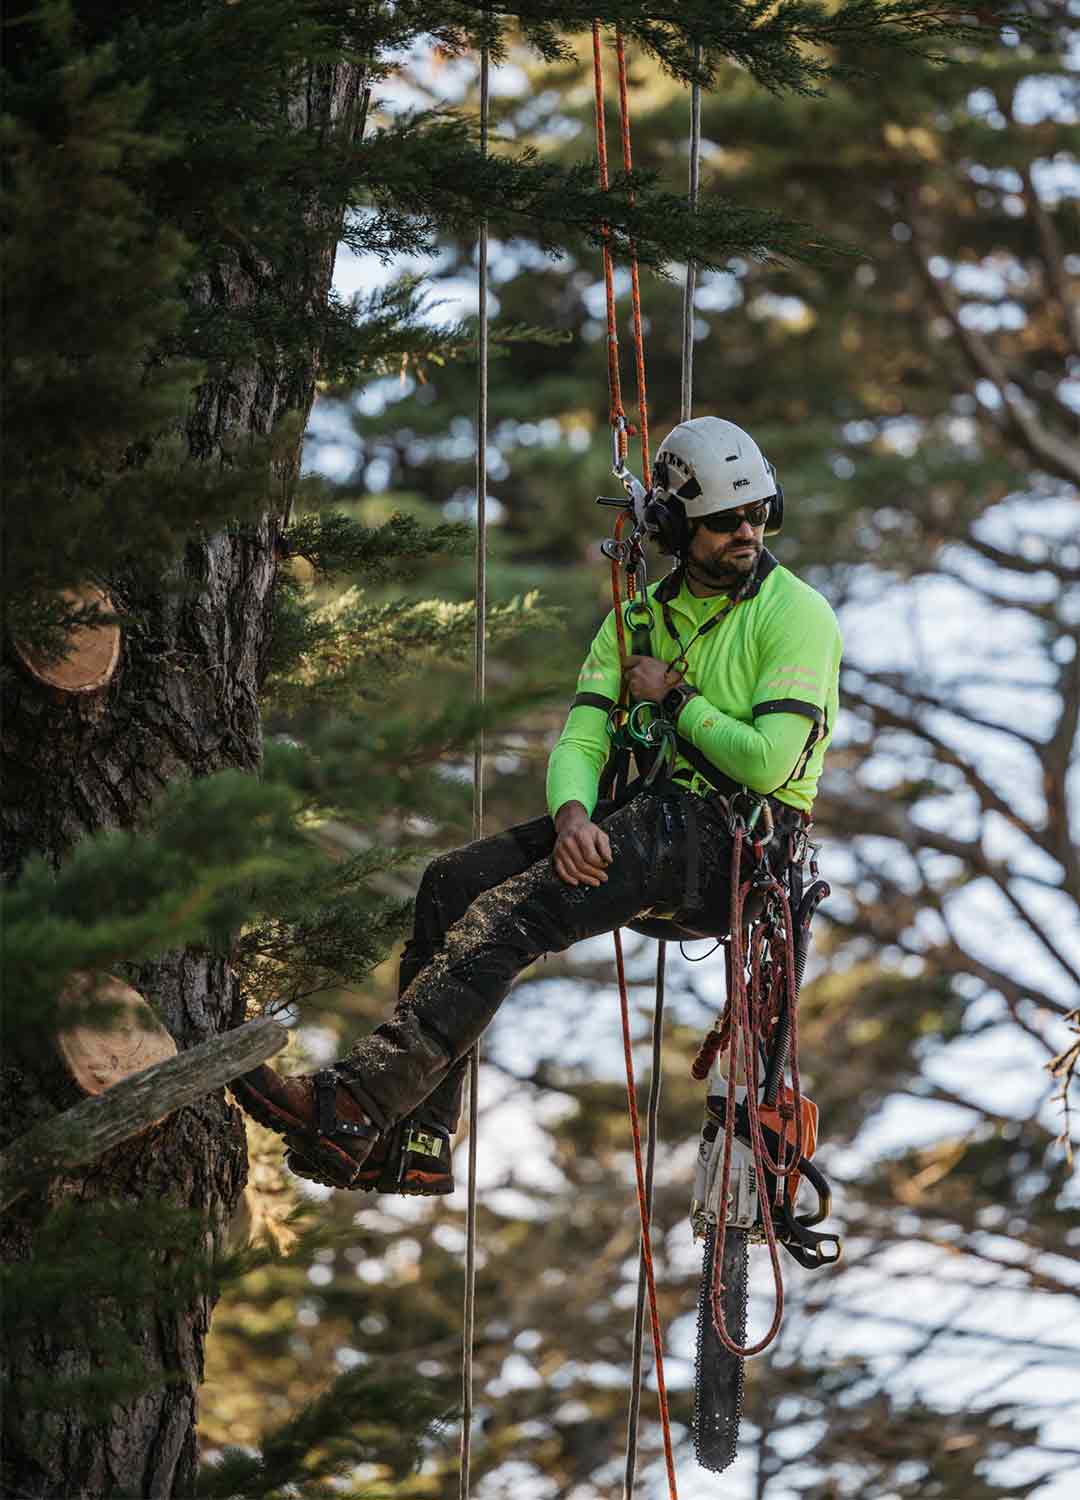 Chris Mackenzie, head arborist and owner, completing tree pruning work using his harness and chainsaw.